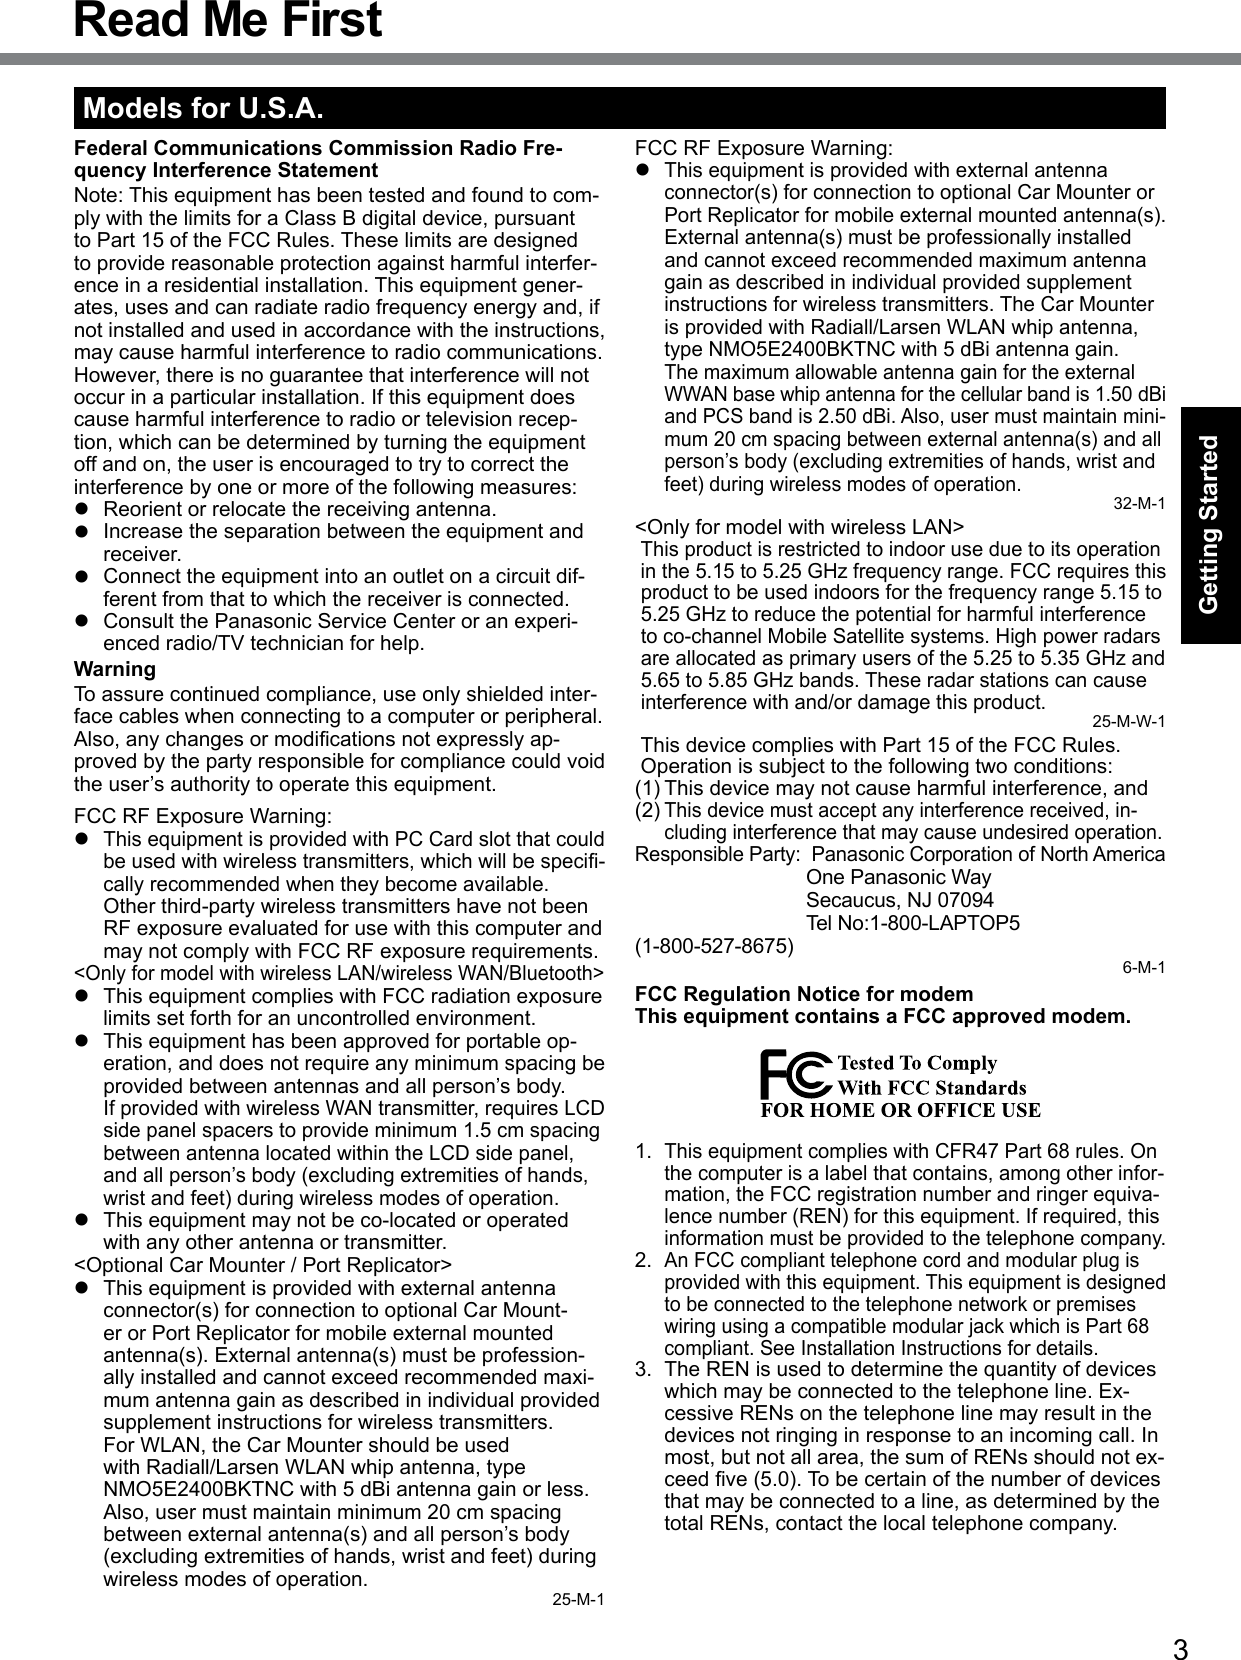 3Getting StartedRead Me FirstModels for U.S.A.Federal Communications Commission Radio Fre-quency Interference StatementNote: This equipment has been tested and found to com-ply with the limits for a Class B digital device, pursuant to Part 15 of the FCC Rules. These limits are designed to provide reasonable protection against harmful interfer-ence in a residential installation. This equipment gener-ates, uses and can radiate radio frequency energy and, if not installed and used in accordance with the instructions, may cause harmful interference to radio communications. However, there is no guarantee that interference will not occur in a particular installation. If this equipment does cause harmful interference to radio or television recep-tion, which can be determined by turning the equipment off and on, the user is encouraged to try to correct the interference by one or more of the following measures:l  Reorient or relocate the receiving antenna.l  Increase the separation between the equipment and receiver.l  Connect the equipment into an outlet on a circuit dif-ferent from that to which the receiver is connected.l  Consult the Panasonic Service Center or an experi-enced radio/TV technician for help.WarningTo assure continued compliance, use only shielded inter-face cables when connecting to a computer or peripheral.  Also,anychangesormodicationsnotexpresslyap-proved by the party responsible for compliance could void the user’s authority to operate this equipment.FCC RF Exposure Warning:l This equipment is provided with PC Card slot that could beusedwithwirelesstransmitters,whichwillbespeci-cally recommended when they become available.Other third-party wireless transmitters have not been RF exposure evaluated for use with this computer and may not comply with FCC RF exposure requirements.&lt;Only for model with wireless LAN/wireless WAN/Bluetooth&gt;l  This equipment complies with FCC radiation exposure limits set forth for an uncontrolled environment.l  This equipment has been approved for portable op-eration, and does not require any minimum spacing be provided between antennas and all person’s body.If provided with wireless WAN transmitter, requires LCD side panel spacers to provide minimum 1.5 cm spacing between antenna located within the LCD side panel, and all person’s body (excluding extremities of hands, wrist and feet) during wireless modes of operation.l  This equipment may not be co-located or operated with any other antenna or transmitter.&lt;Optional Car Mounter / Port Replicator&gt;l  This equipment is provided with external antenna connector(s) for connection to optional Car Mount-er or Port Replicator for mobile external mounted antenna(s). External antenna(s) must be profession-ally installed and cannot exceed recommended maxi-mum antenna gain as described in individual provided supplement instructions for wireless transmitters.  For WLAN, the Car Mounter should be used with Radiall/Larsen WLAN whip antenna, type NMO5E2400BKTNC with 5 dBi antenna gain or less. Also, user must maintain minimum 20 cm spacing between external antenna(s) and all person’s body (excluding extremities of hands, wrist and feet) during wireless modes of operation. 25-M-1FCC RF Exposure Warning:l This equipment is provided with external antenna connector(s) for connection to optional Car Mounter or Port Replicator for mobile external mounted antenna(s). External antenna(s) must be professionally installed and cannot exceed recommended maximum antenna gain as described in individual provided supplement instructions for wireless transmitters. The Car Mounter is provided with Radiall/Larsen WLAN whip antenna, type NMO5E2400BKTNC with 5 dBi antenna gain.The maximum allowable antenna gain for the external WWAN base whip antenna for the cellular band is 1.50 dBi and PCS band is 2.50 dBi. Also, user must maintain mini-mum 20 cm spacing between external antenna(s) and all person’s body (excluding extremities of hands, wrist and feet) during wireless modes of operation.32-M-1&lt;Only for model with wireless LAN&gt;This product is restricted to indoor use due to its operation in the 5.15 to 5.25 GHz frequency range. FCC requires this product to be used indoors for the frequency range 5.15 to 5.25 GHz to reduce the potential for harmful interference to co-channel Mobile Satellite systems. High power radars are allocated as primary users of the 5.25 to 5.35 GHz and 5.65 to 5.85 GHz bands. These radar stations can cause interference with and/or damage this product.25-M-W-1This device complies with Part 15 of the FCC Rules. Operation is subject to the following two conditions:(1) This device may not cause harmful interference, and(2) This device must accept any interference received, in-cluding interference that may cause undesired operation.Responsible Party:  Panasonic Corporation of North America  One Panasonic Way  Secaucus, NJ 07094  Tel No:1-800-LAPTOP5 (1-800-527-8675)6-M-1FCC Regulation Notice for modem This equipment contains a FCC approved modem.1. This equipment complies with CFR47 Part 68 rules. On the computer is a label that contains, among other infor-mation, the FCC registration number and ringer equiva-lence number (REN) for this equipment. If required, this information must be provided to the telephone company.2. An FCC compliant telephone cord and modular plug is provided with this equipment. This equipment is designed to be connected to the telephone network or premises wiring using a compatible modular jack which is Part 68 compliant. See Installation Instructions for details.3.  The REN is used to determine the quantity of devices which may be connected to the telephone line. Ex-cessive RENs on the telephone line may result in the devices not ringing in response to an incoming call. In most, but not all area, the sum of RENs should not ex-ceedve(5.0).Tobecertainofthenumberofdevicesthat may be connected to a line, as determined by the total RENs, contact the local telephone company.